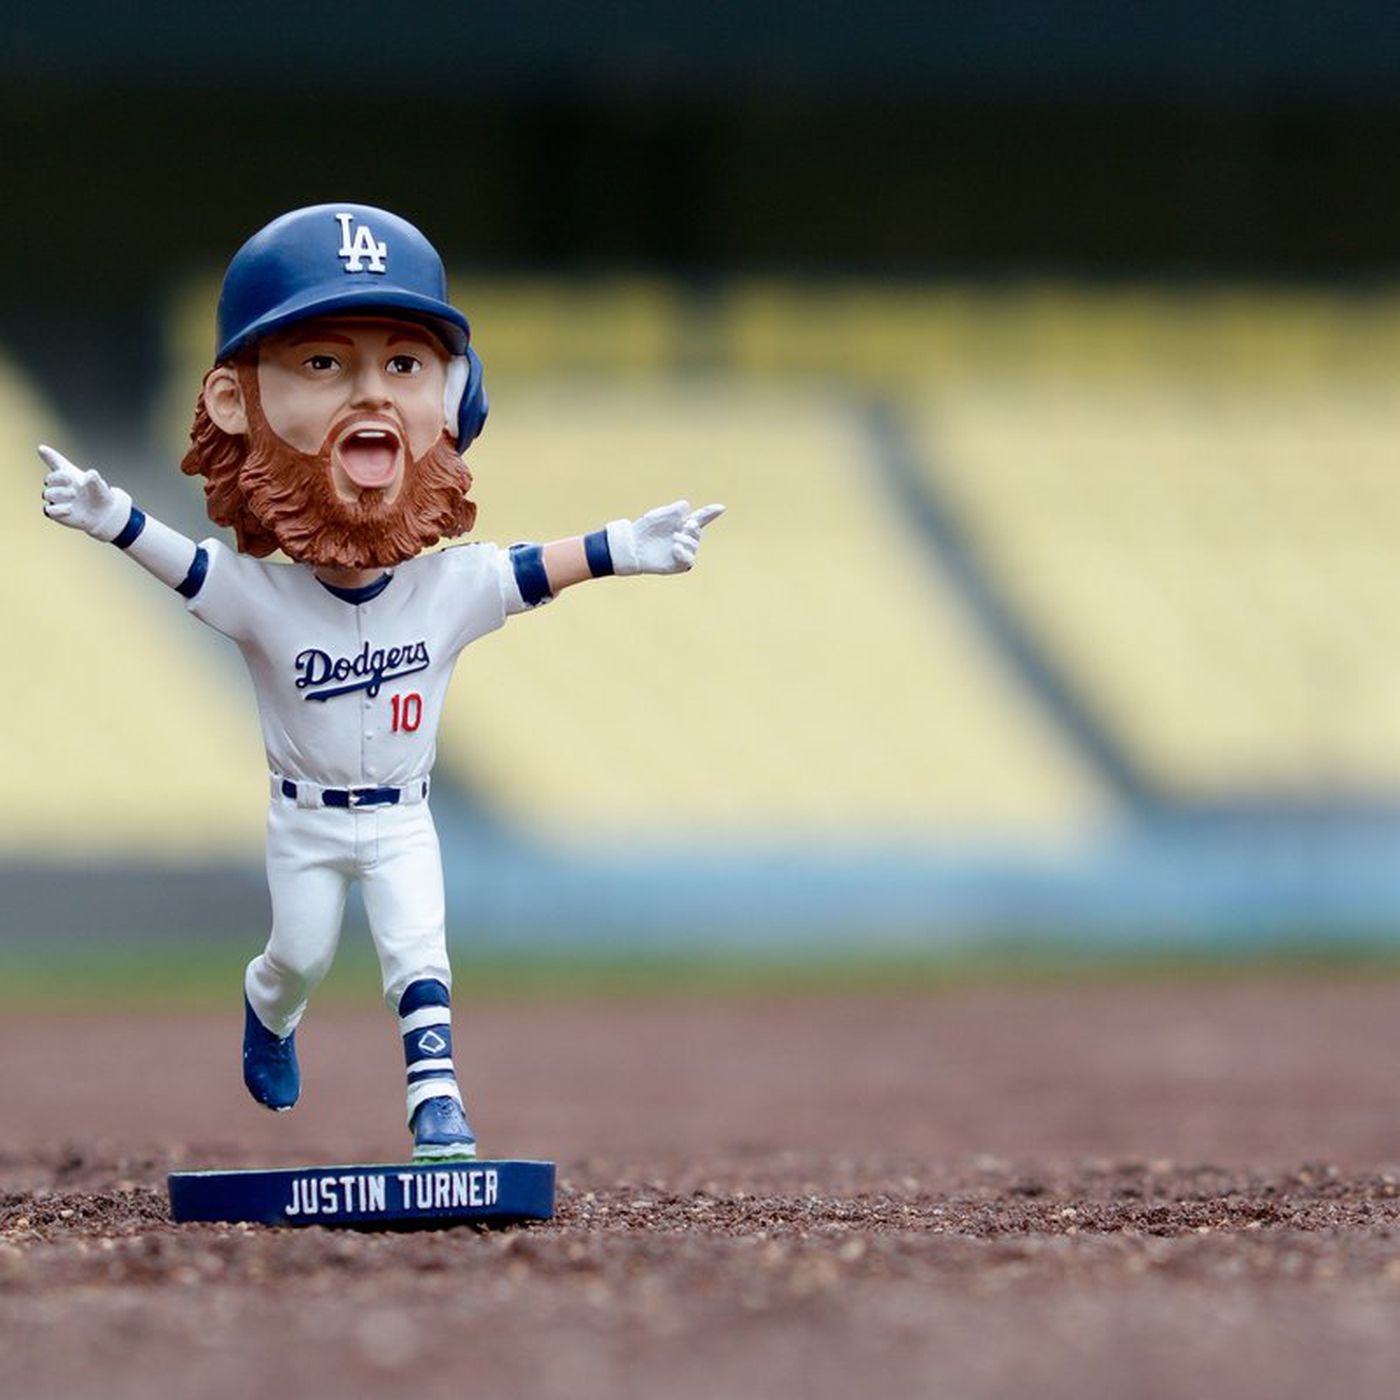 Justin Turner Los Angeles Dodgers 2017 All-Star Game Special Edition Bobblehead 